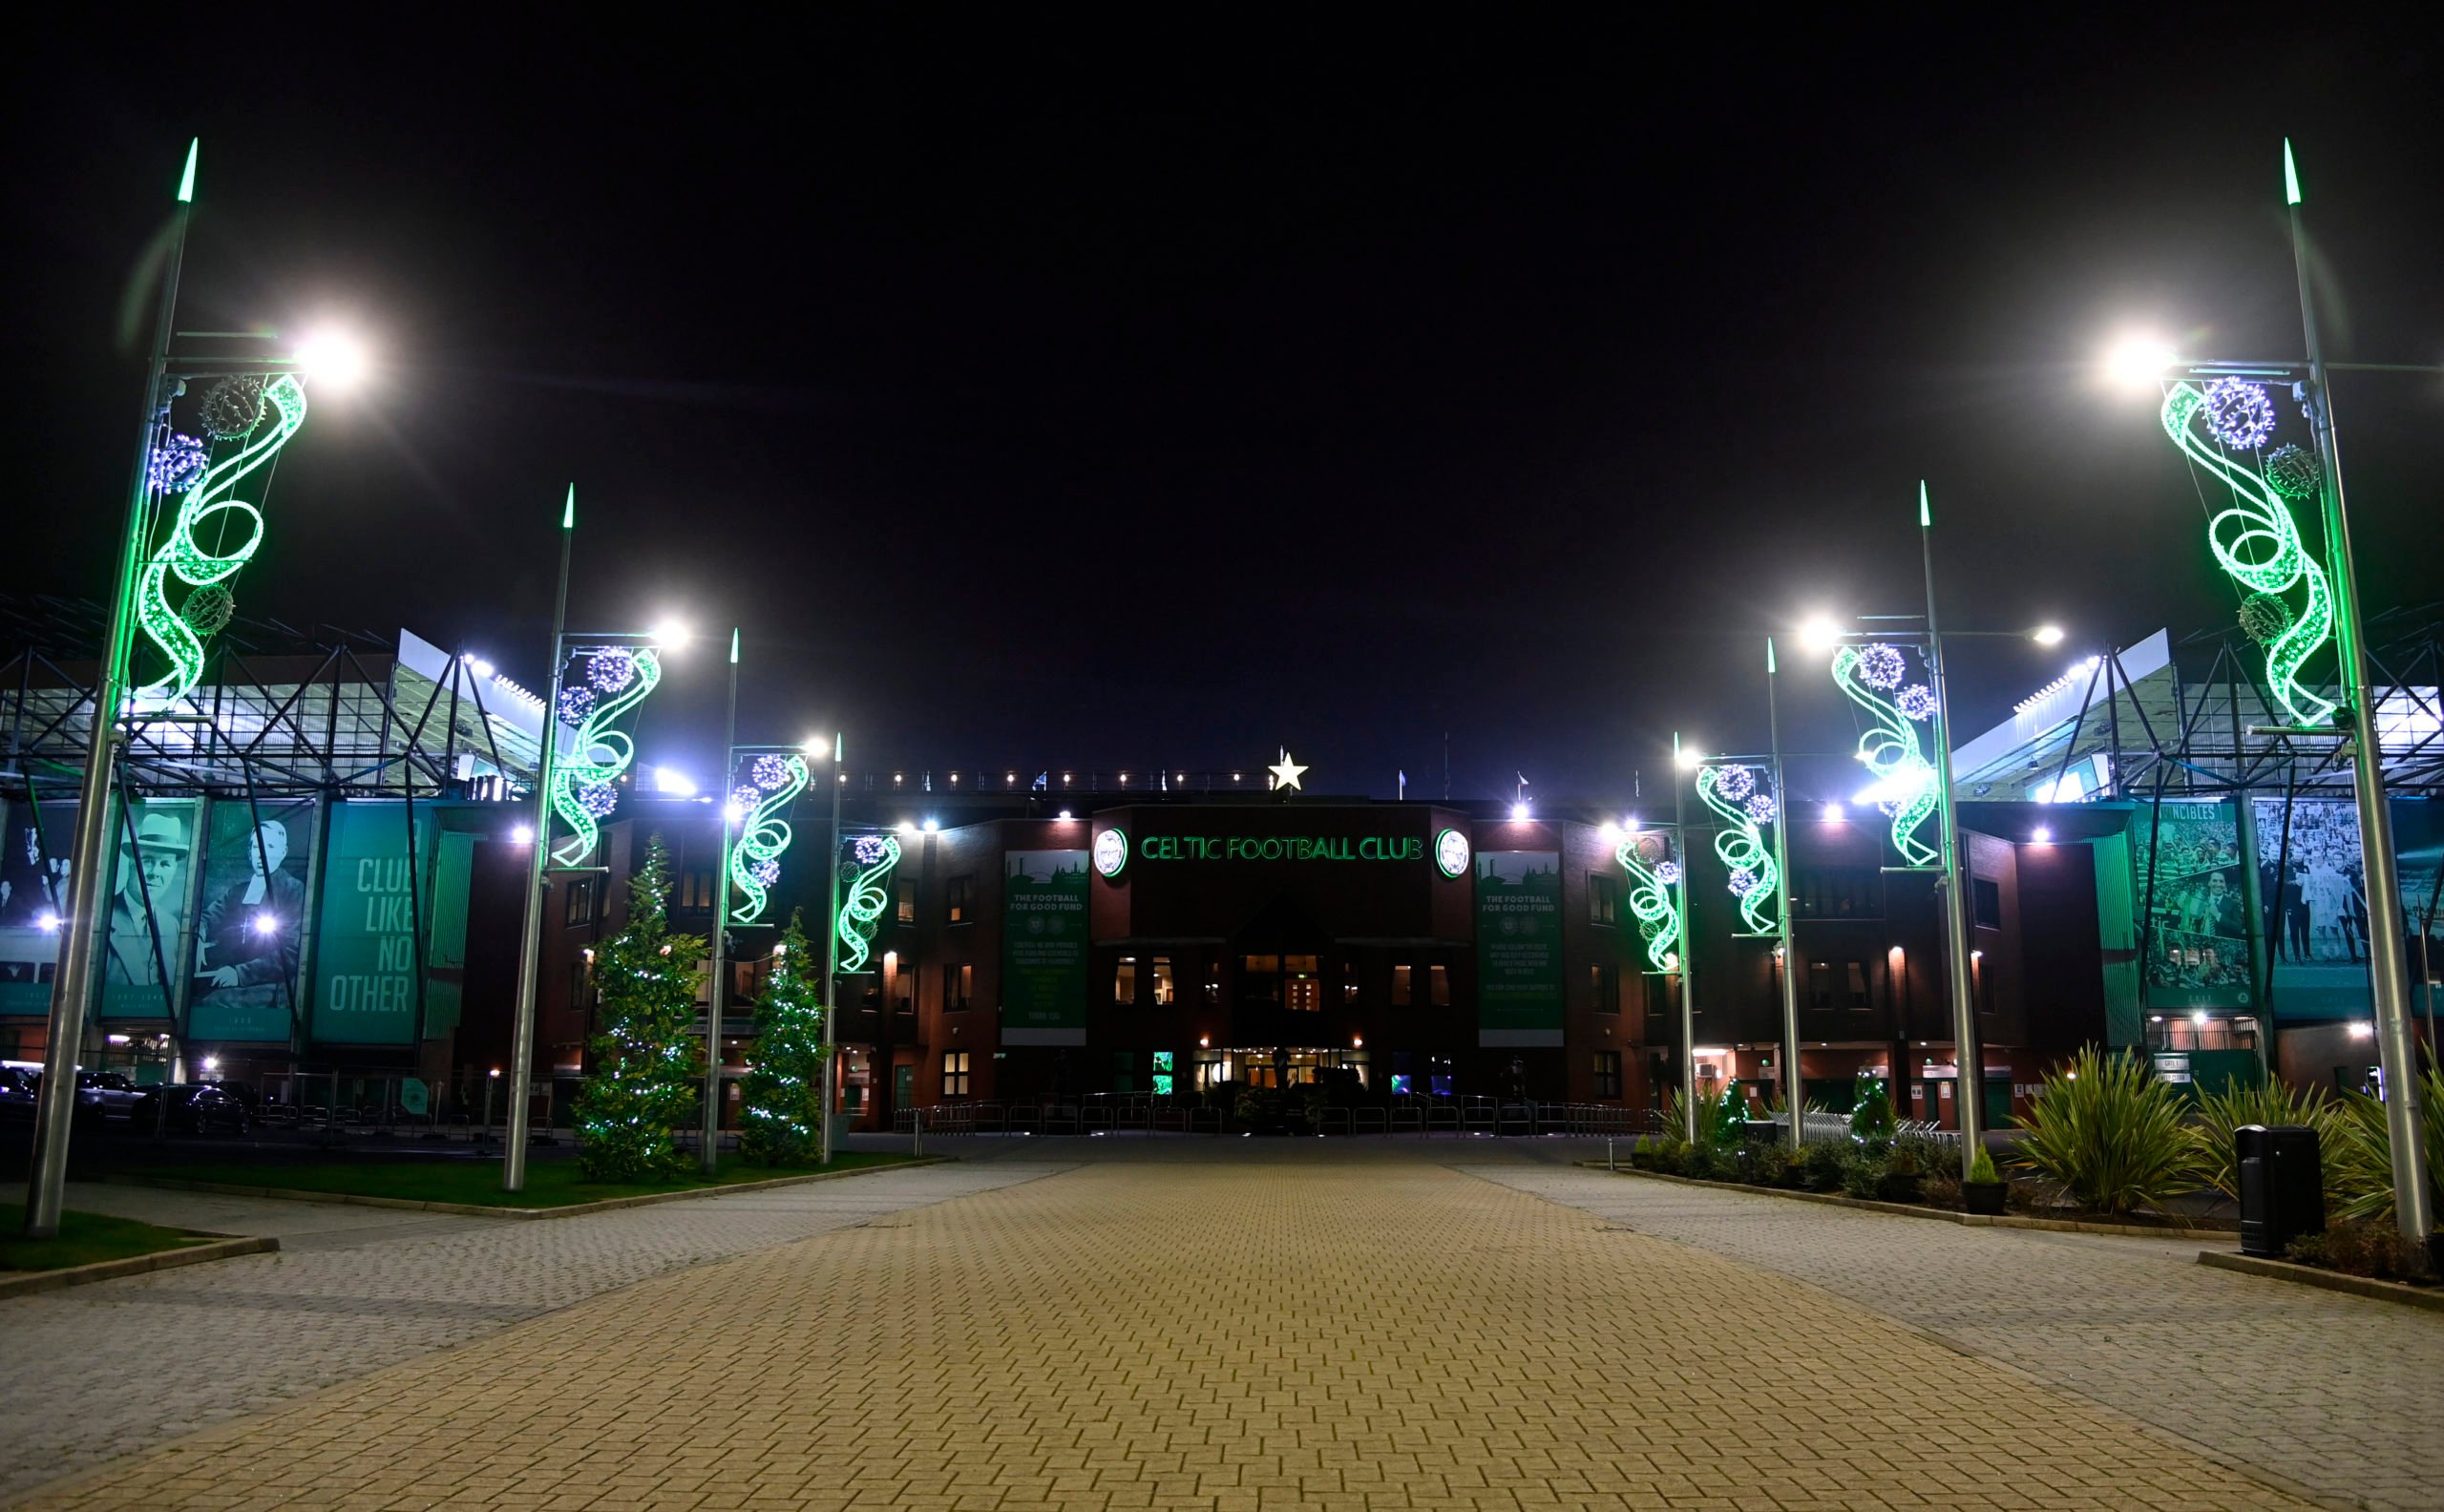 The arrogant Celtic statement on Dubai mess lacks accountability and is an insult to fans